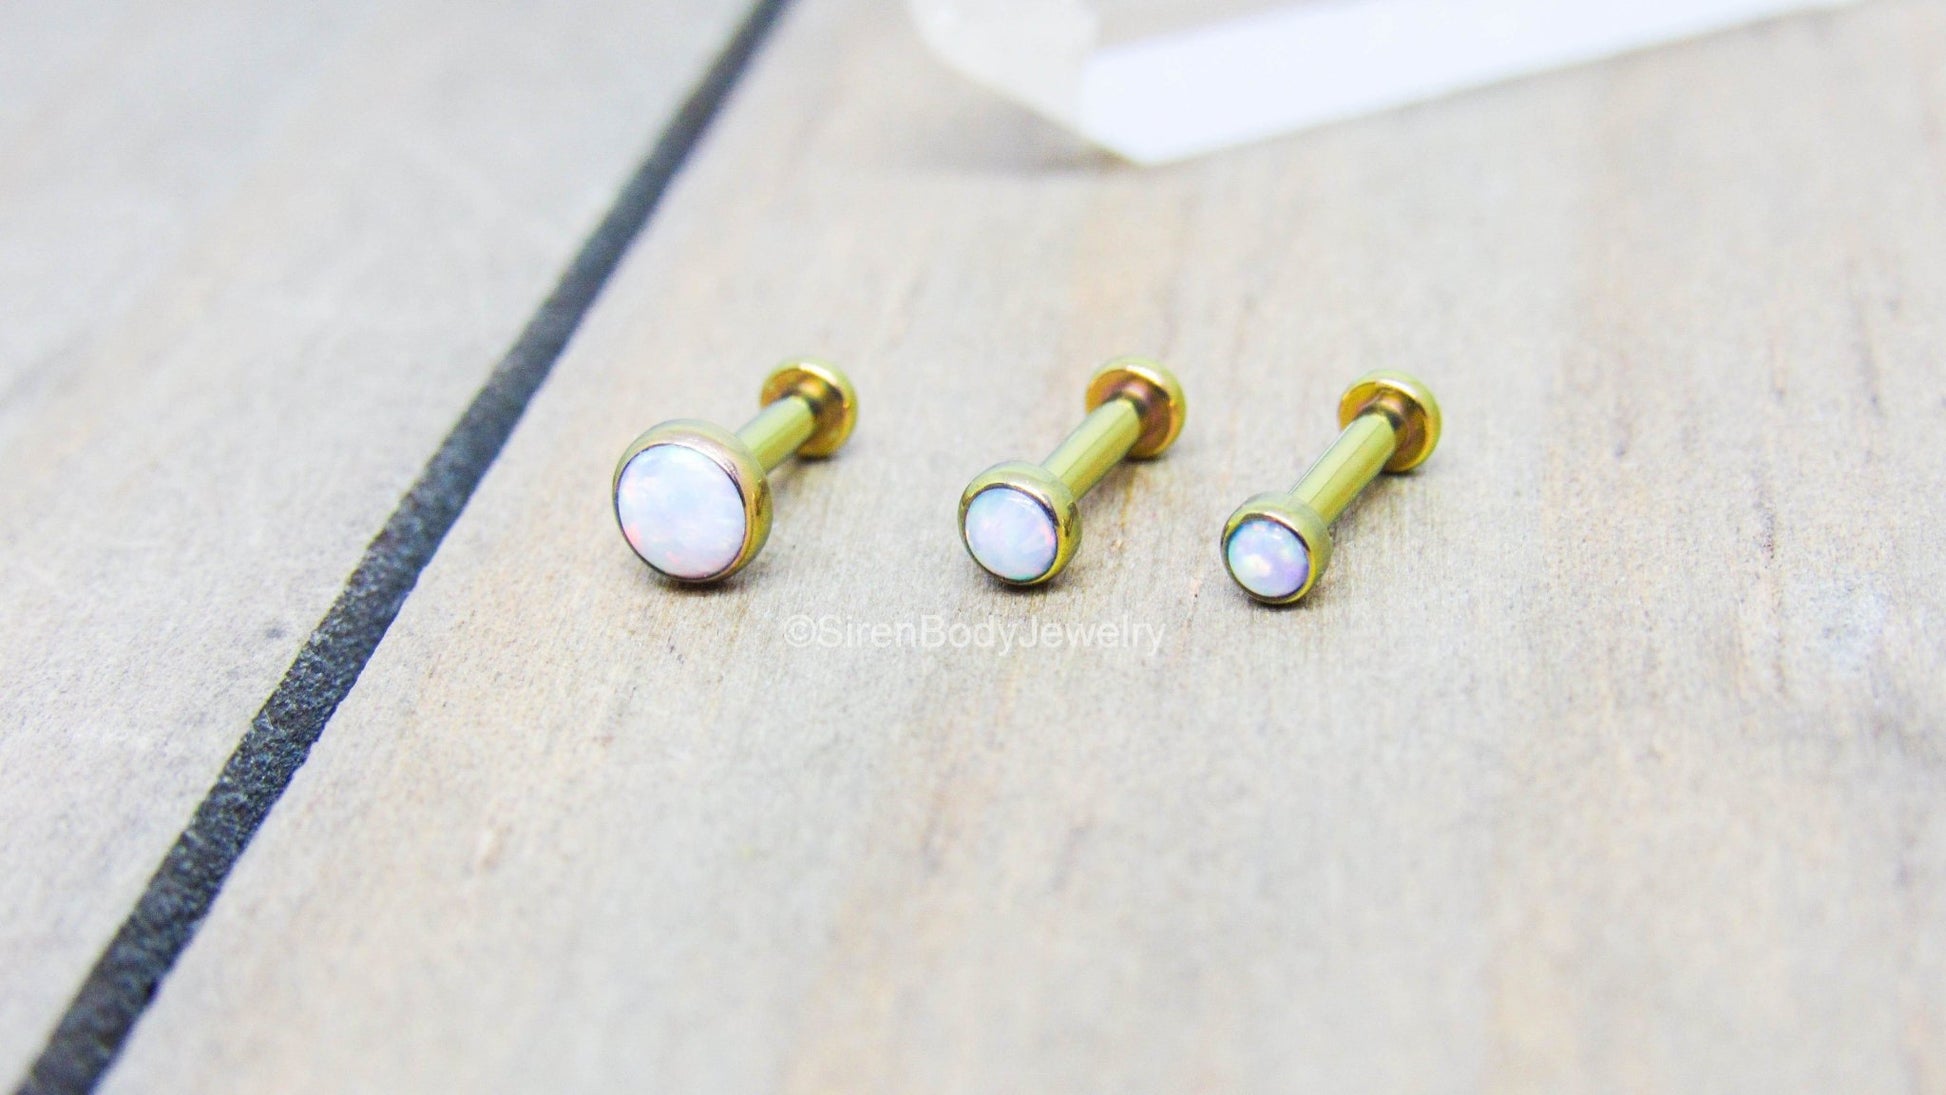 16g White Opal Titanium Flat Back Labret Set of 3 Triple Forward Helix Cartilage Earrings Hypoallergenic 5/16 Pick Your Anodized Color 16g 5/16 /